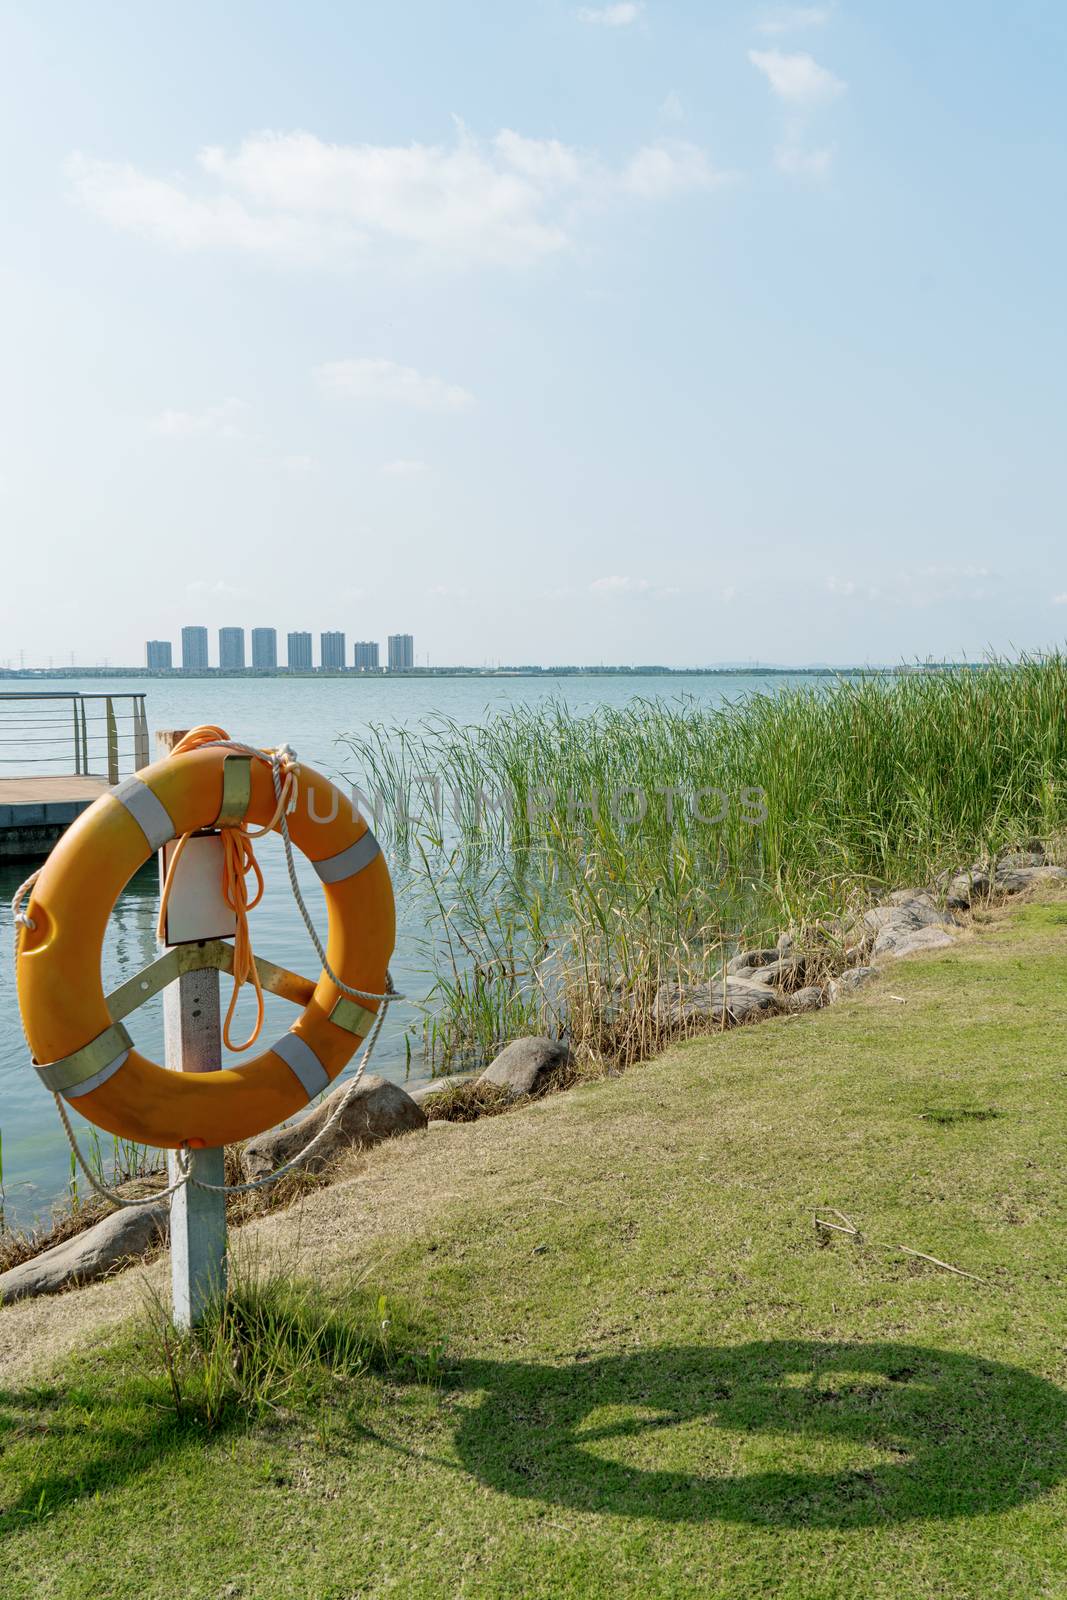 The life buoy by the lake in a public park. Photo in Suzhou, China.